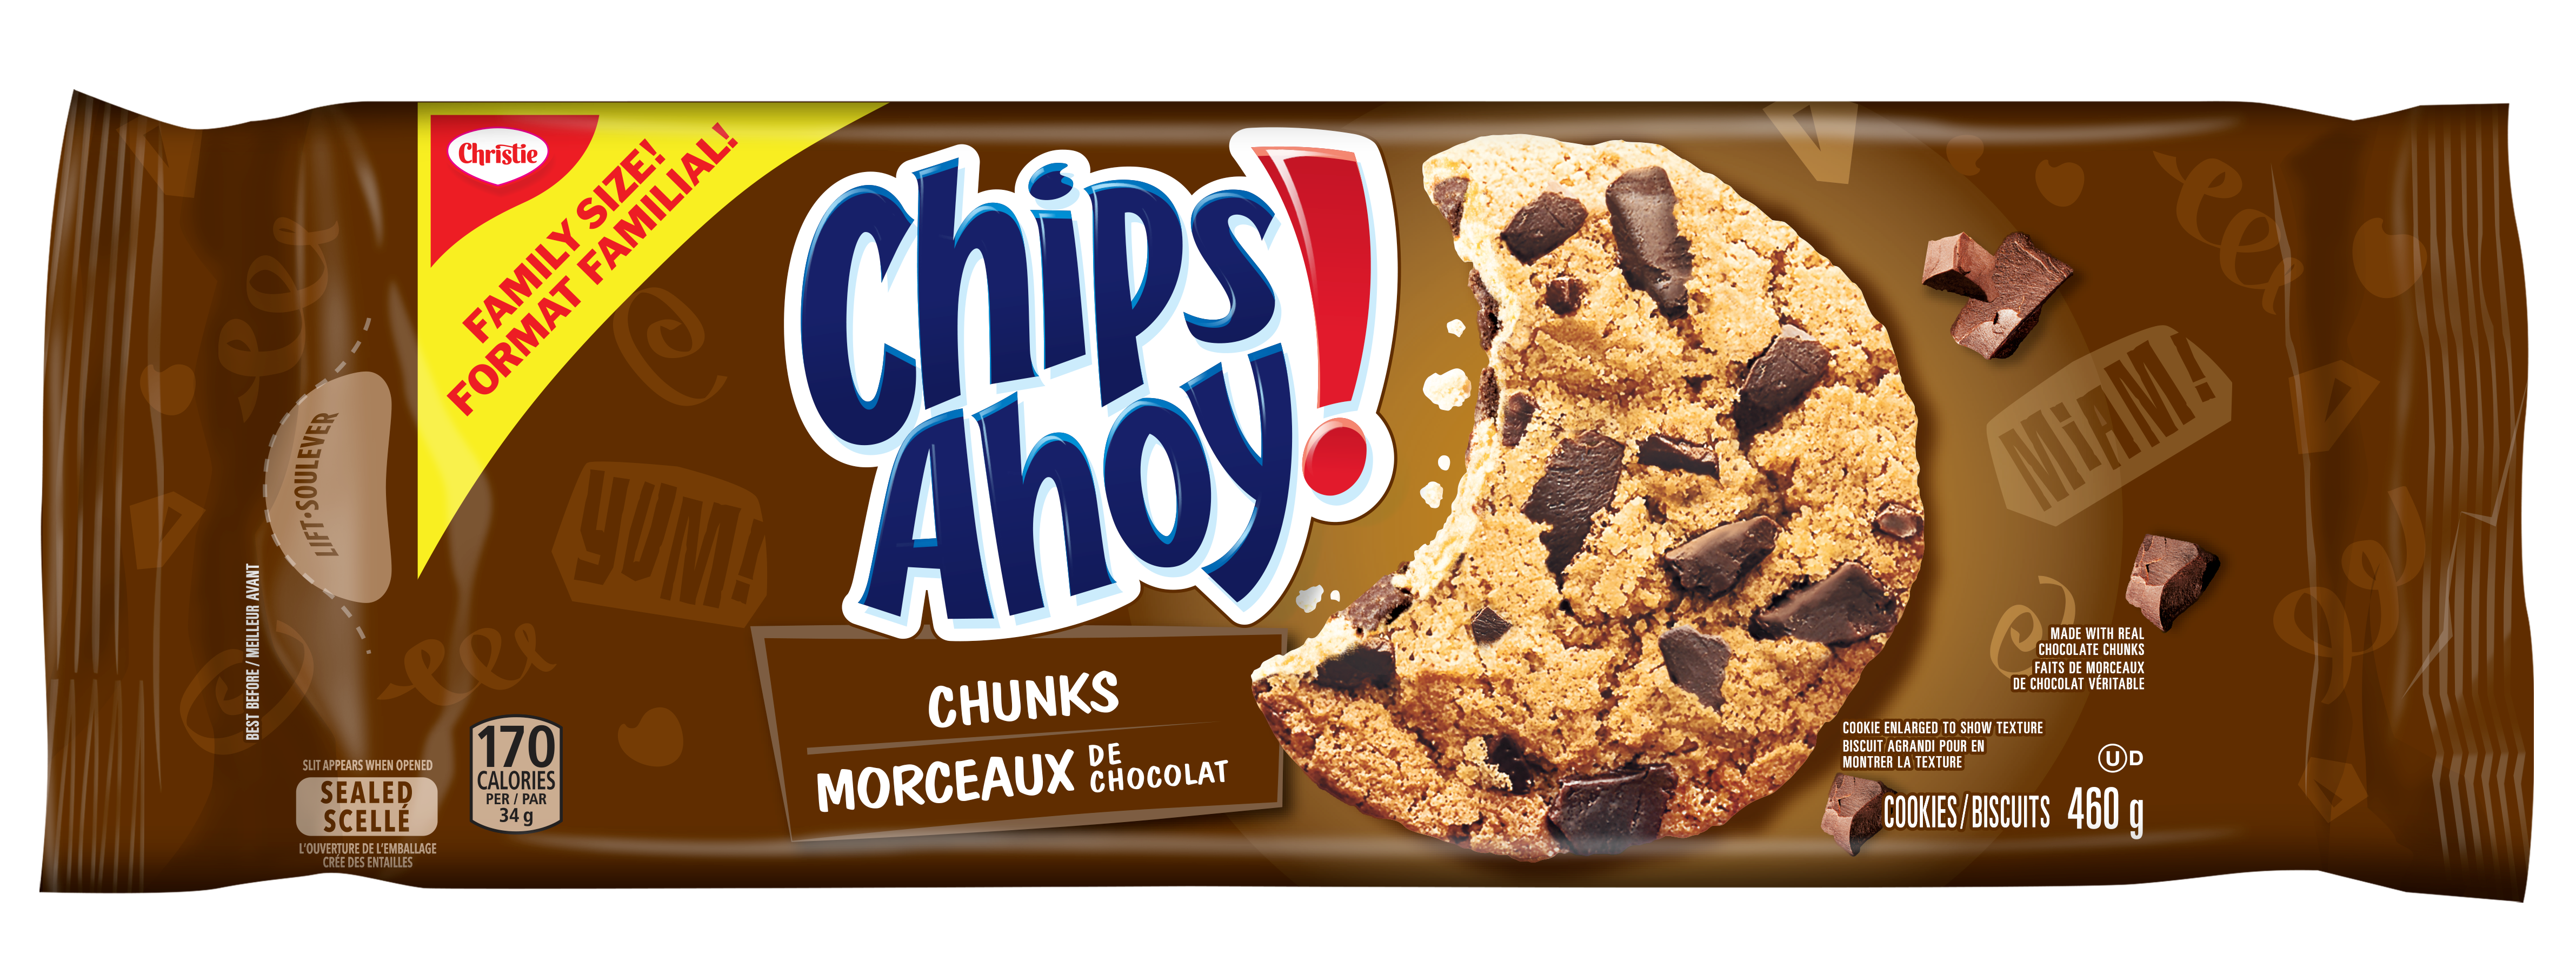 Chips Ahoy! Chunks Chocolate Chip Cookies Family Size, 460G-1